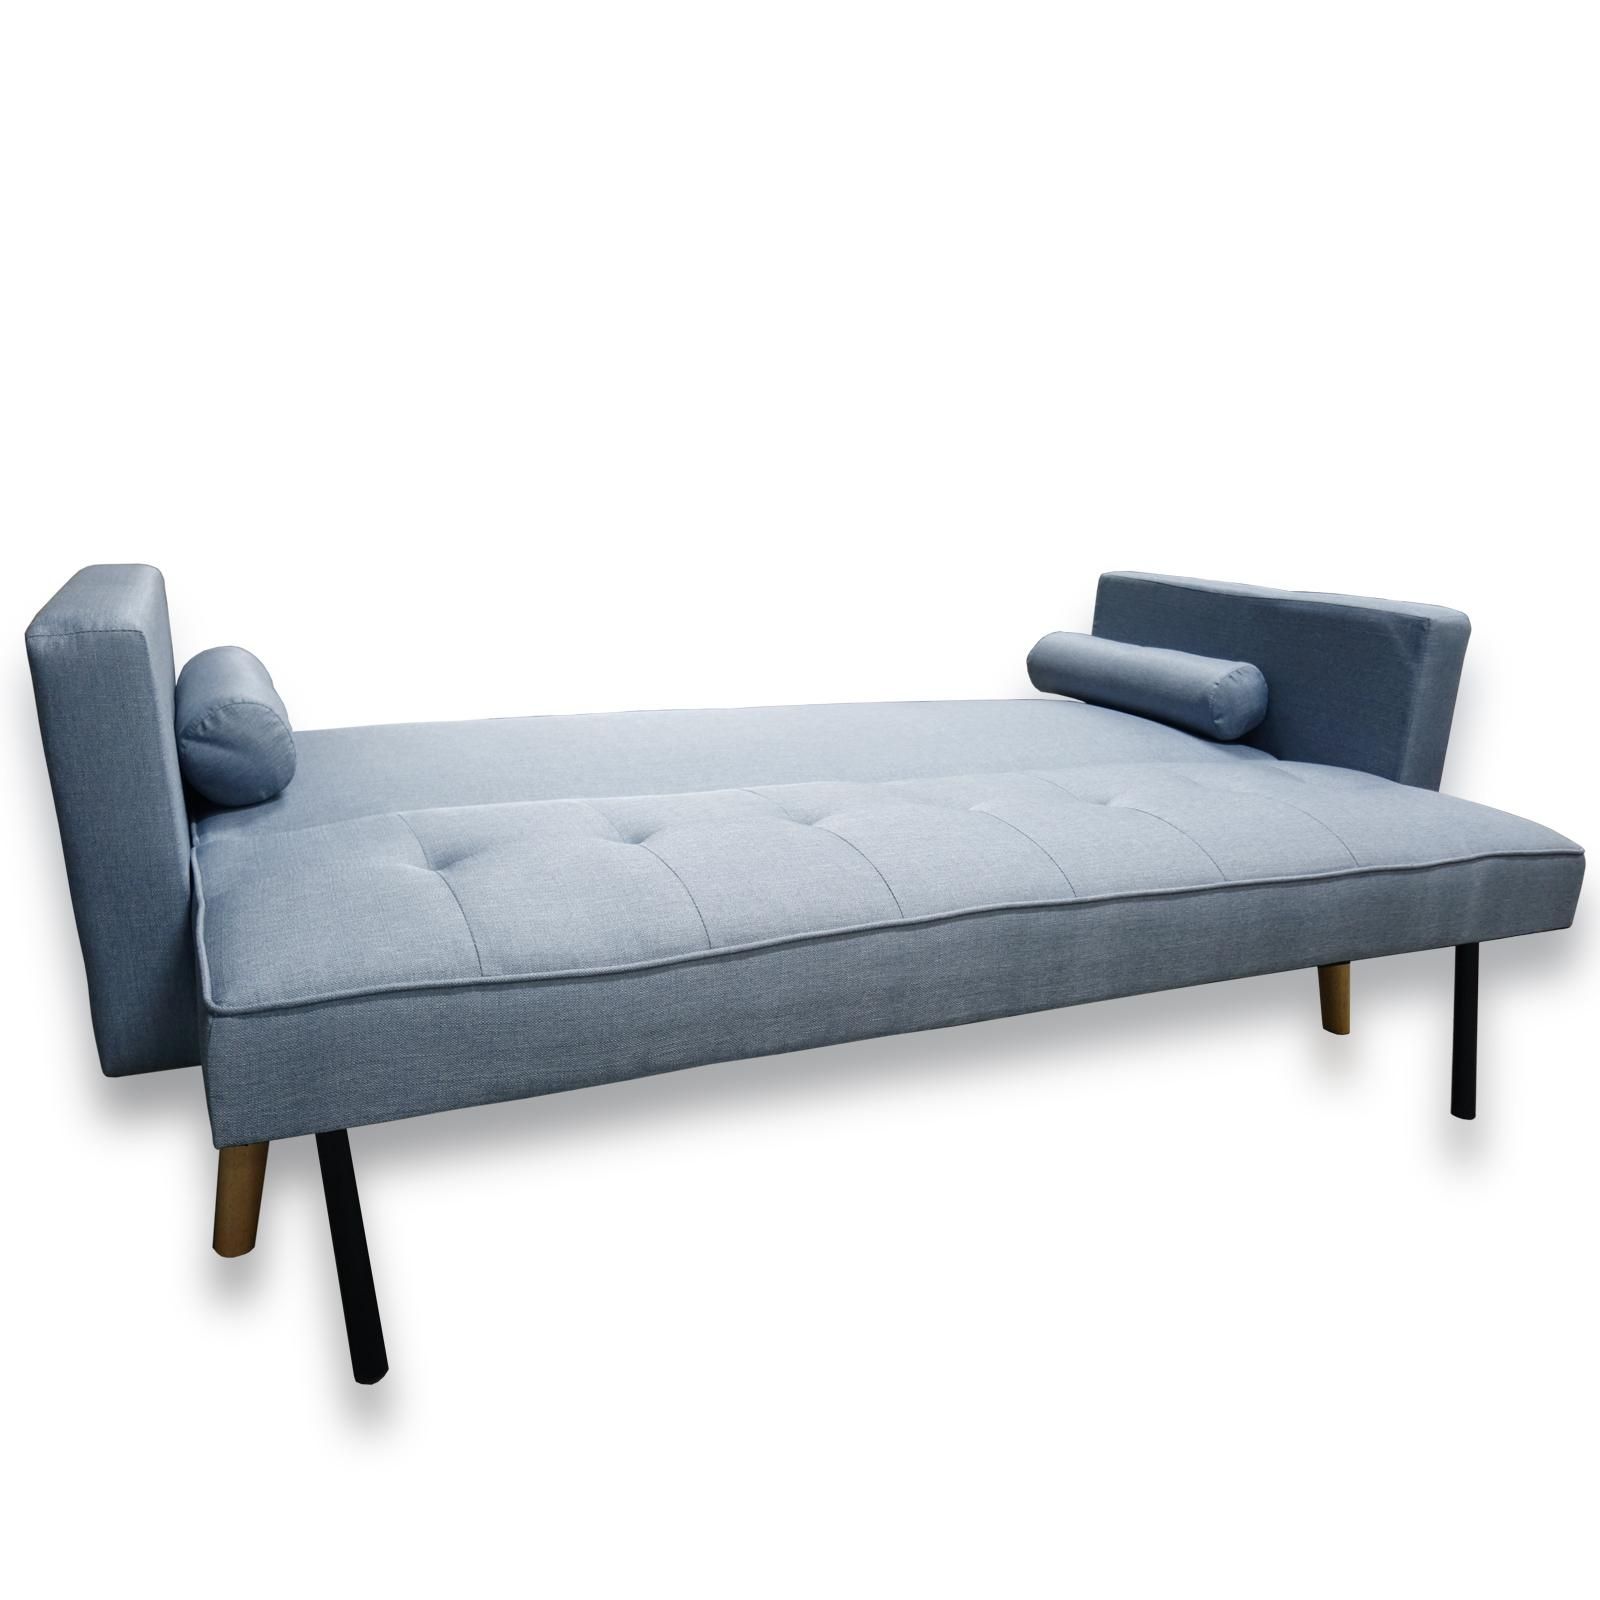 Sofas Center : 52 Incredible Click Clack Sofa Picture Inspirations Within Clic Clac Sofa Beds (View 13 of 20)